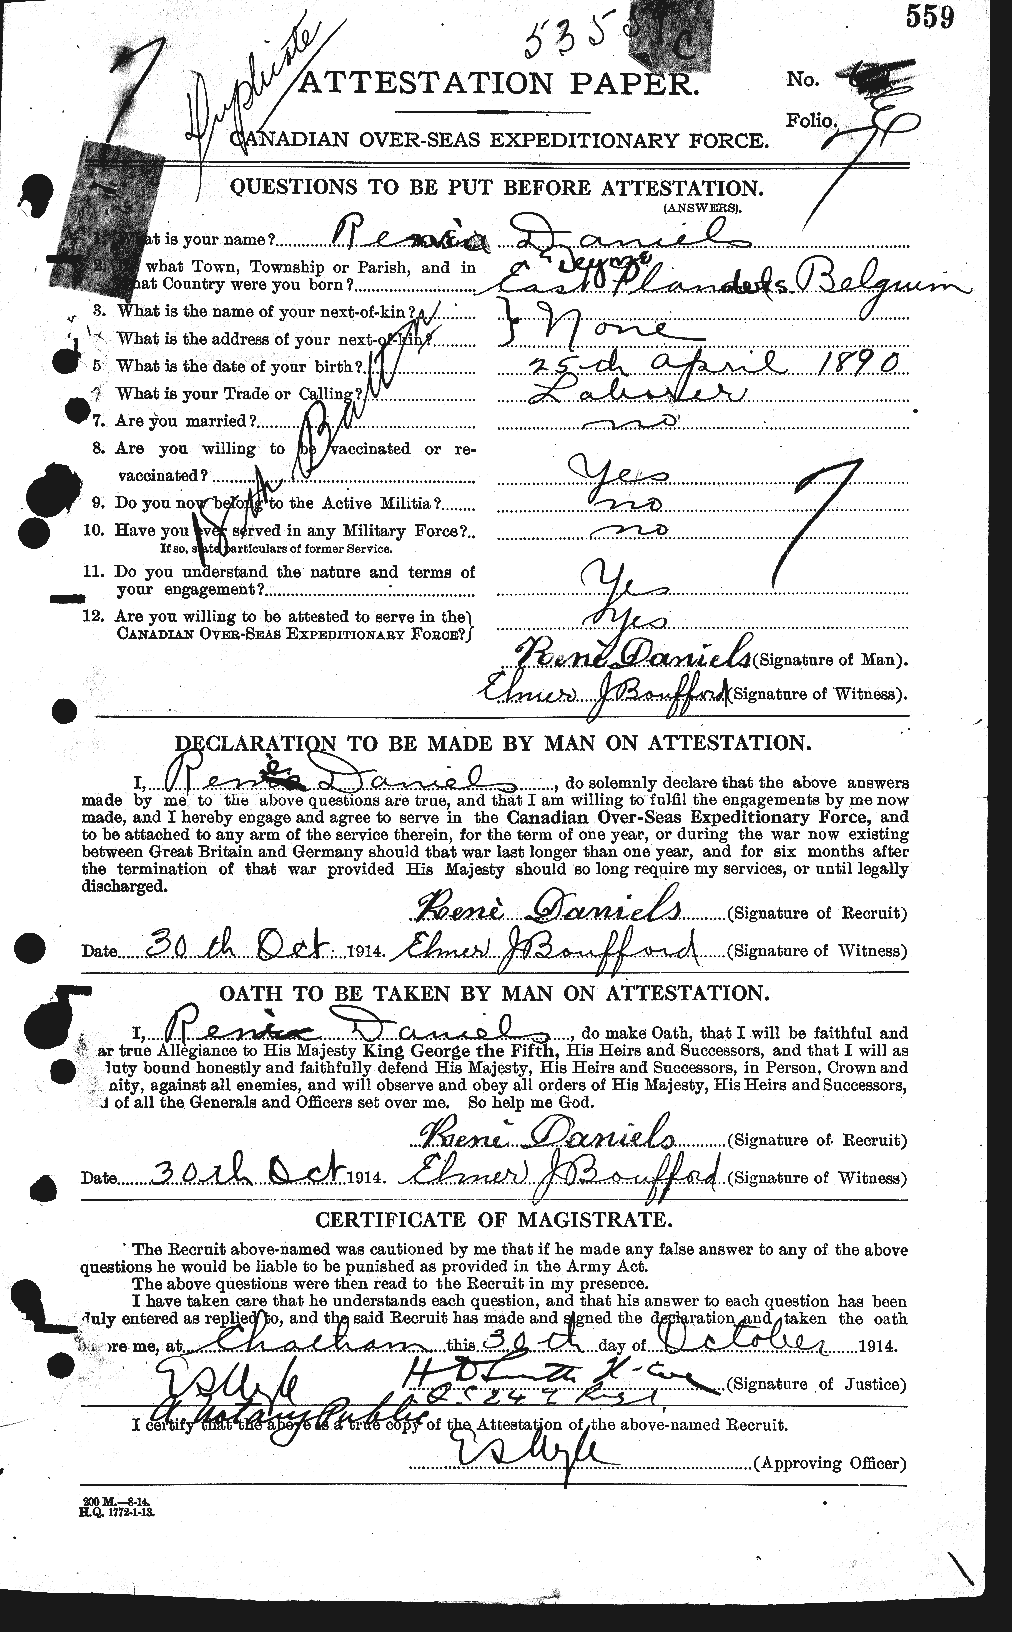 Personnel Records of the First World War - CEF 279667a